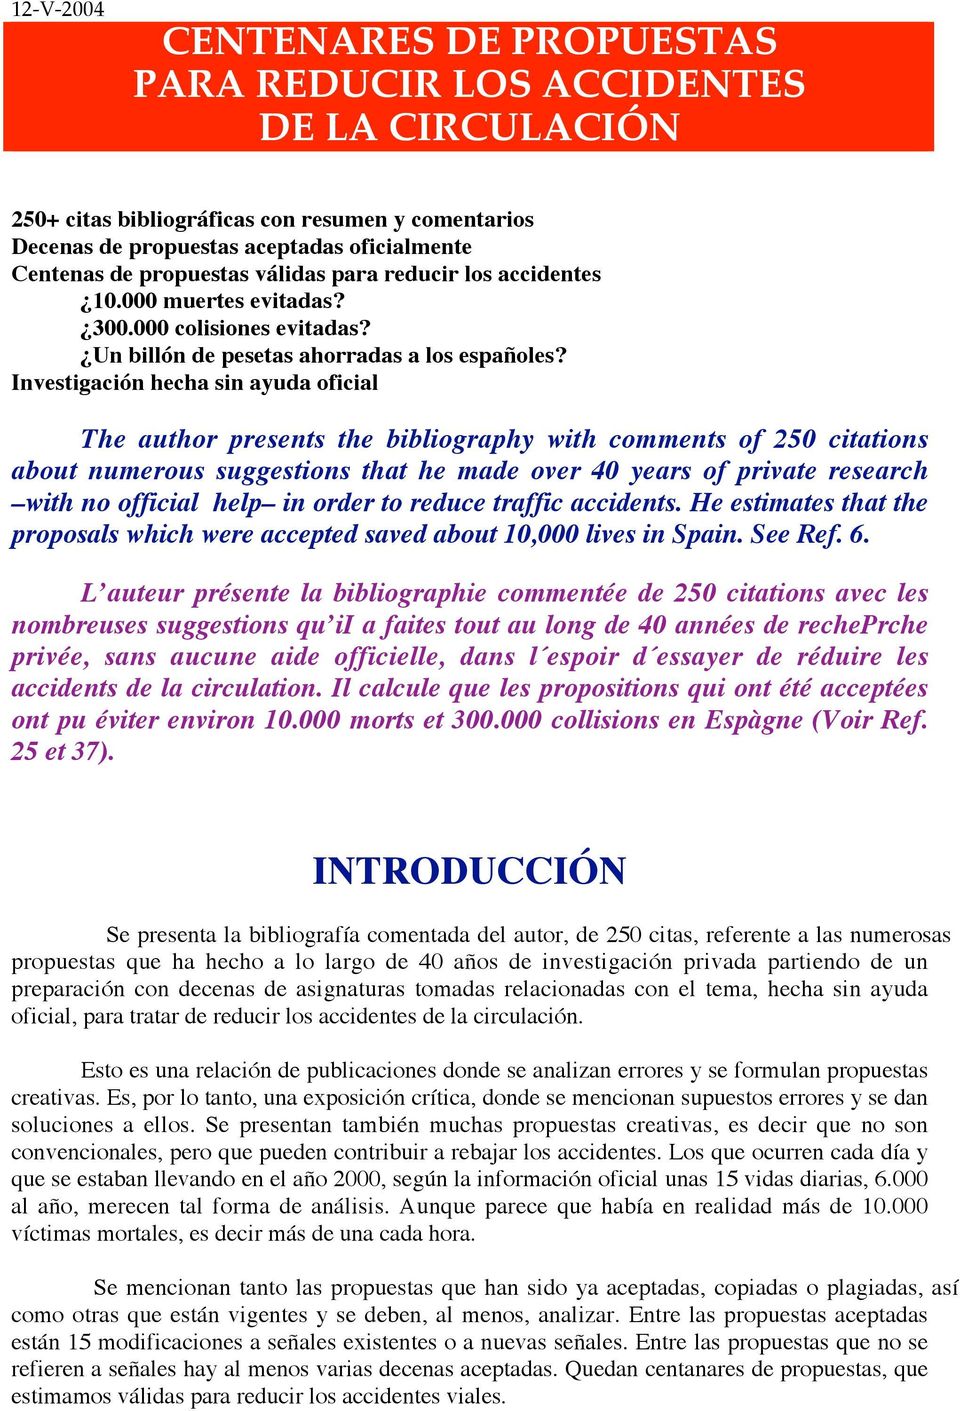 Investigación hecha sin ayuda oficial The author presents the bibliography with comments of 250 citations about numerous suggestions that he made over 40 years of private research with no official